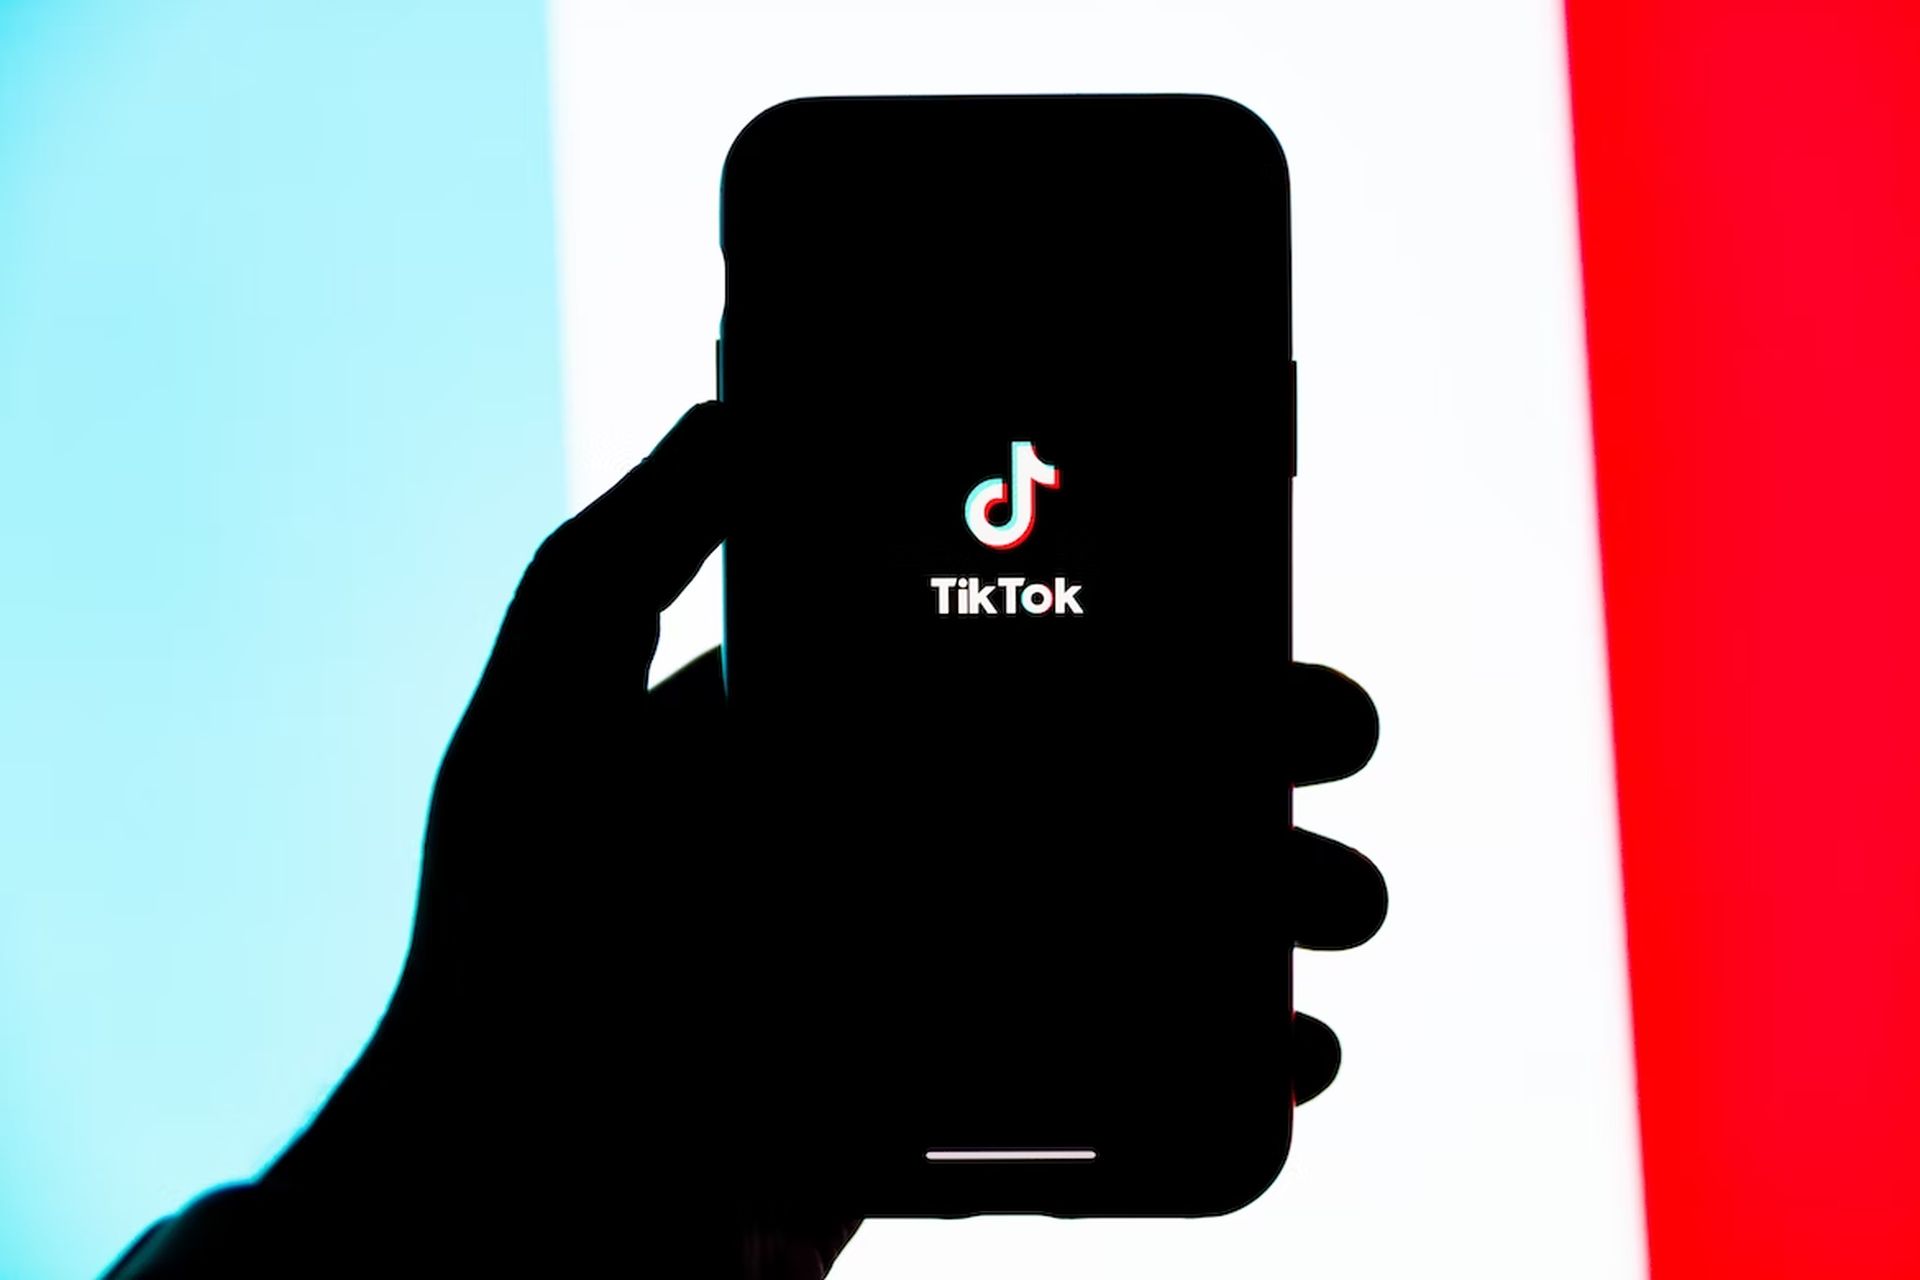 Plastic surgery filter TikTok: How to get and use it?